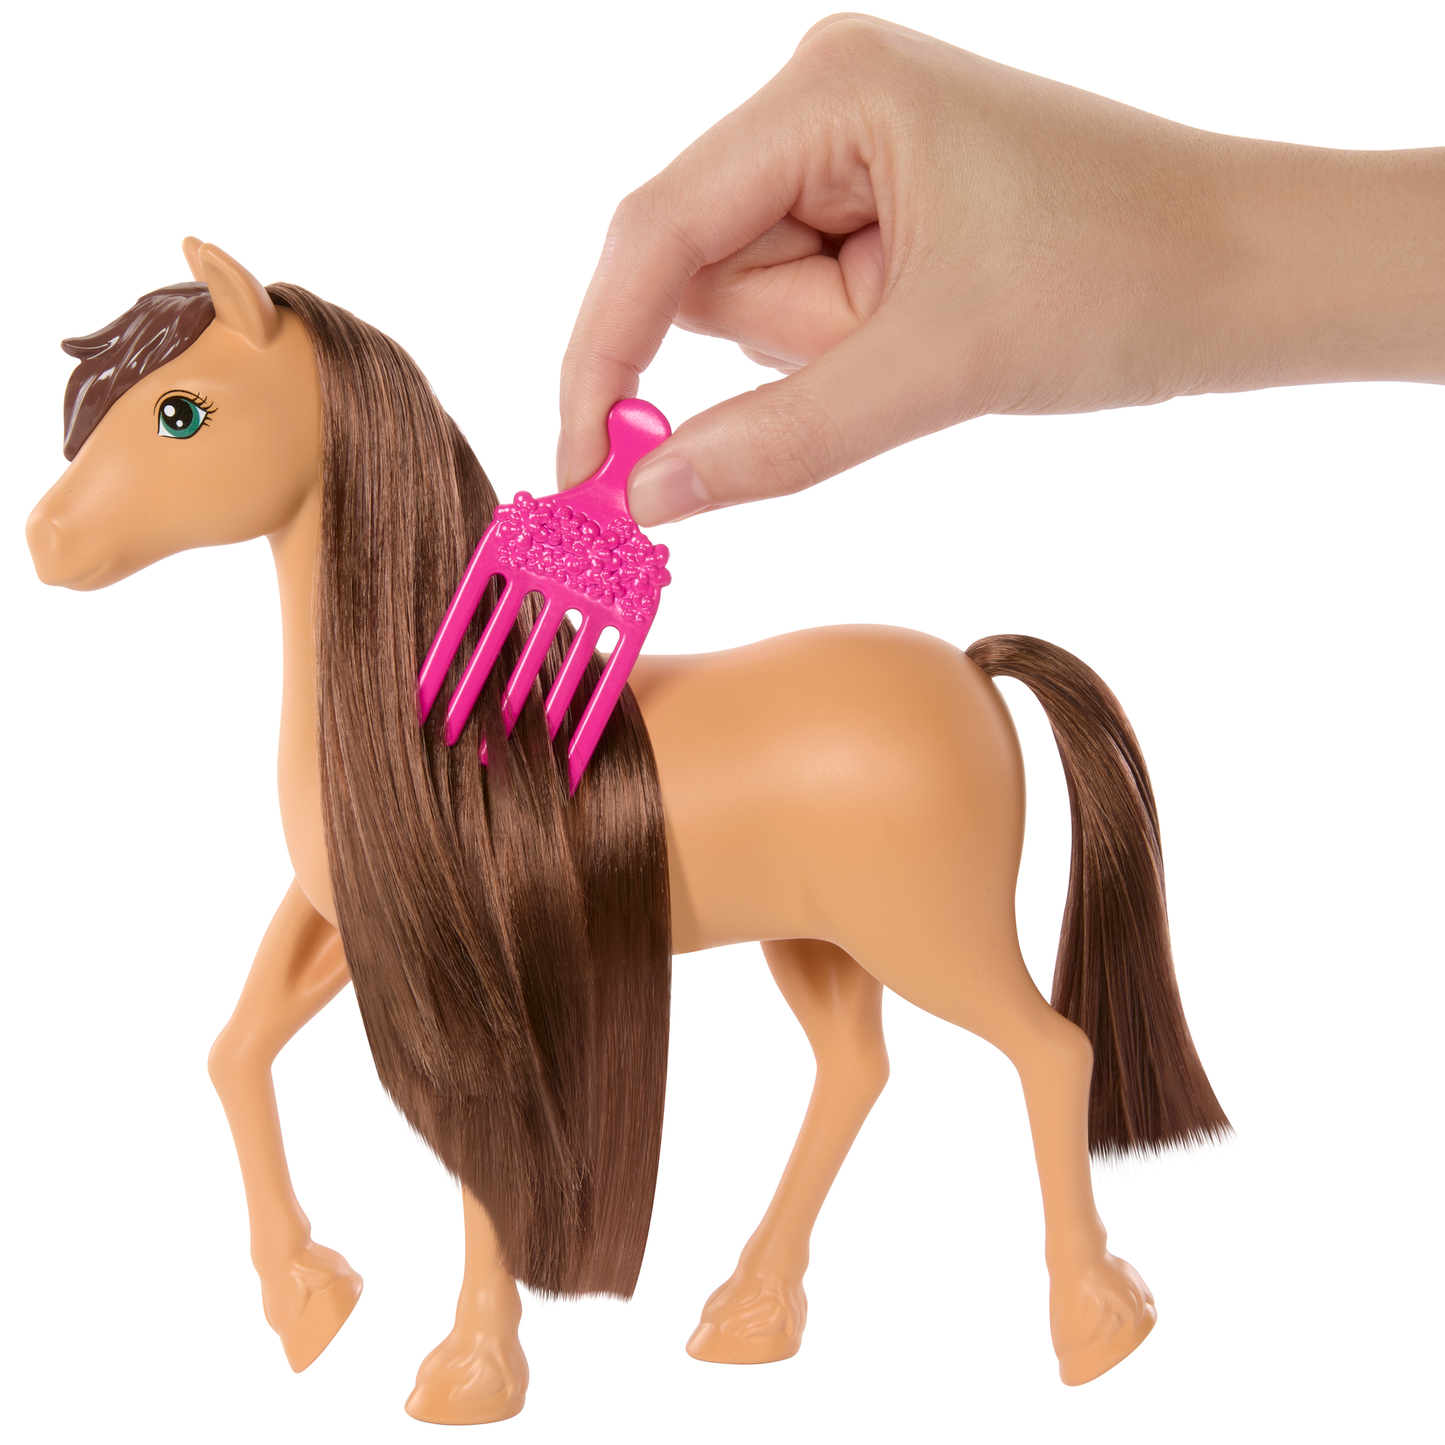 Barbie Mysteries The Great Horse Chase Pepper Pony and Accessories